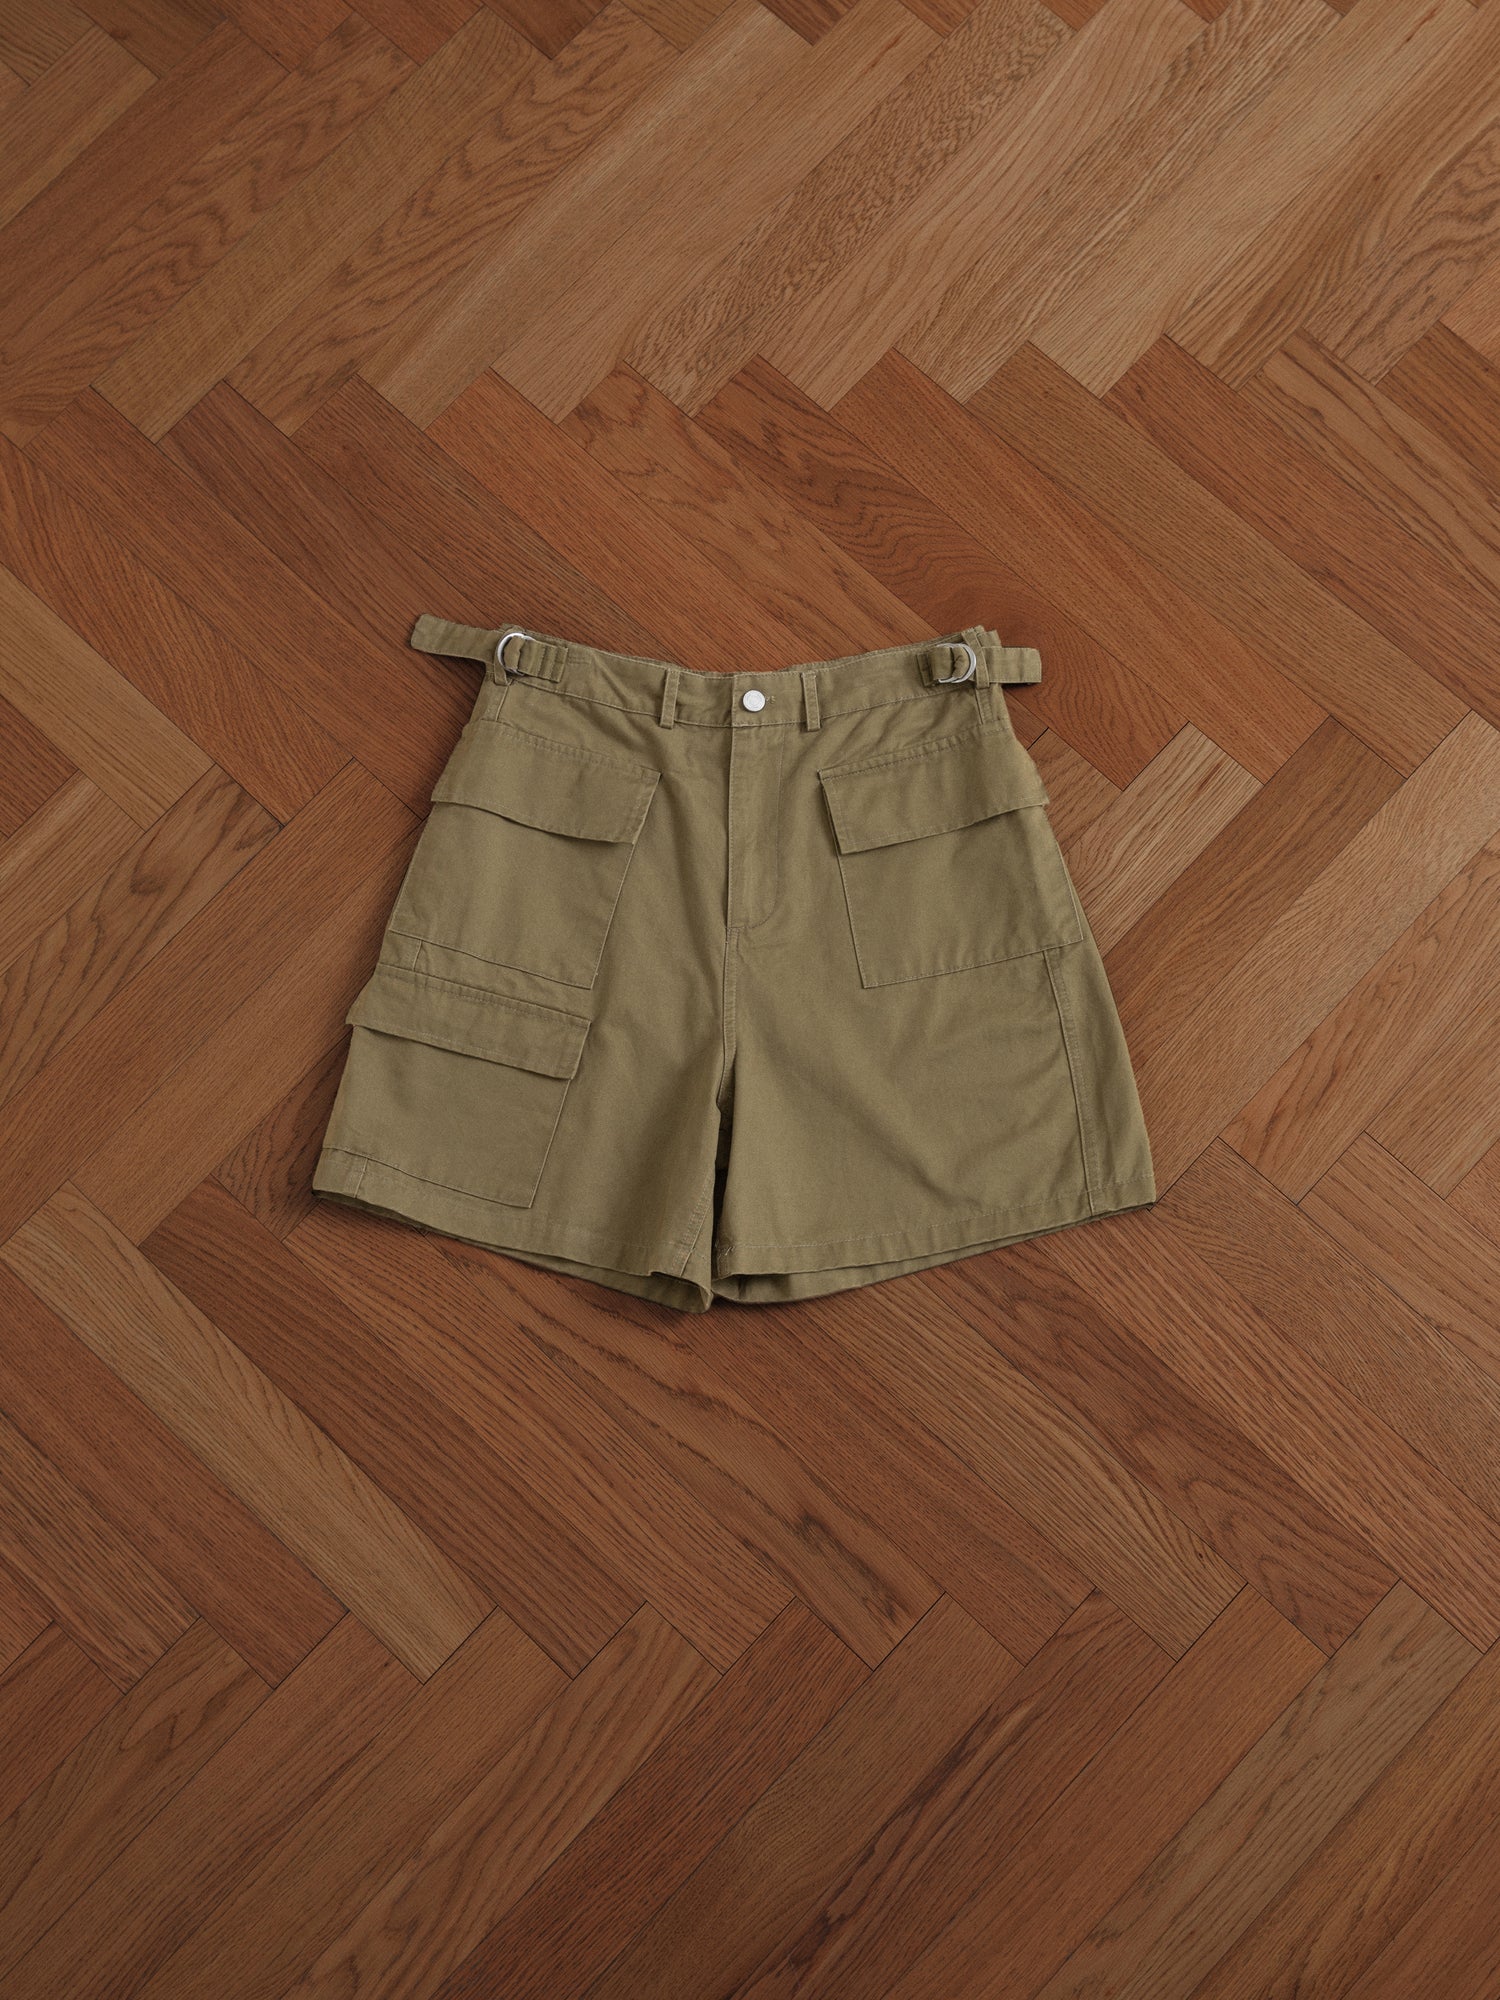 A pair of Found Twill Cargo Shorts with cargo pockets on a wooden floor.